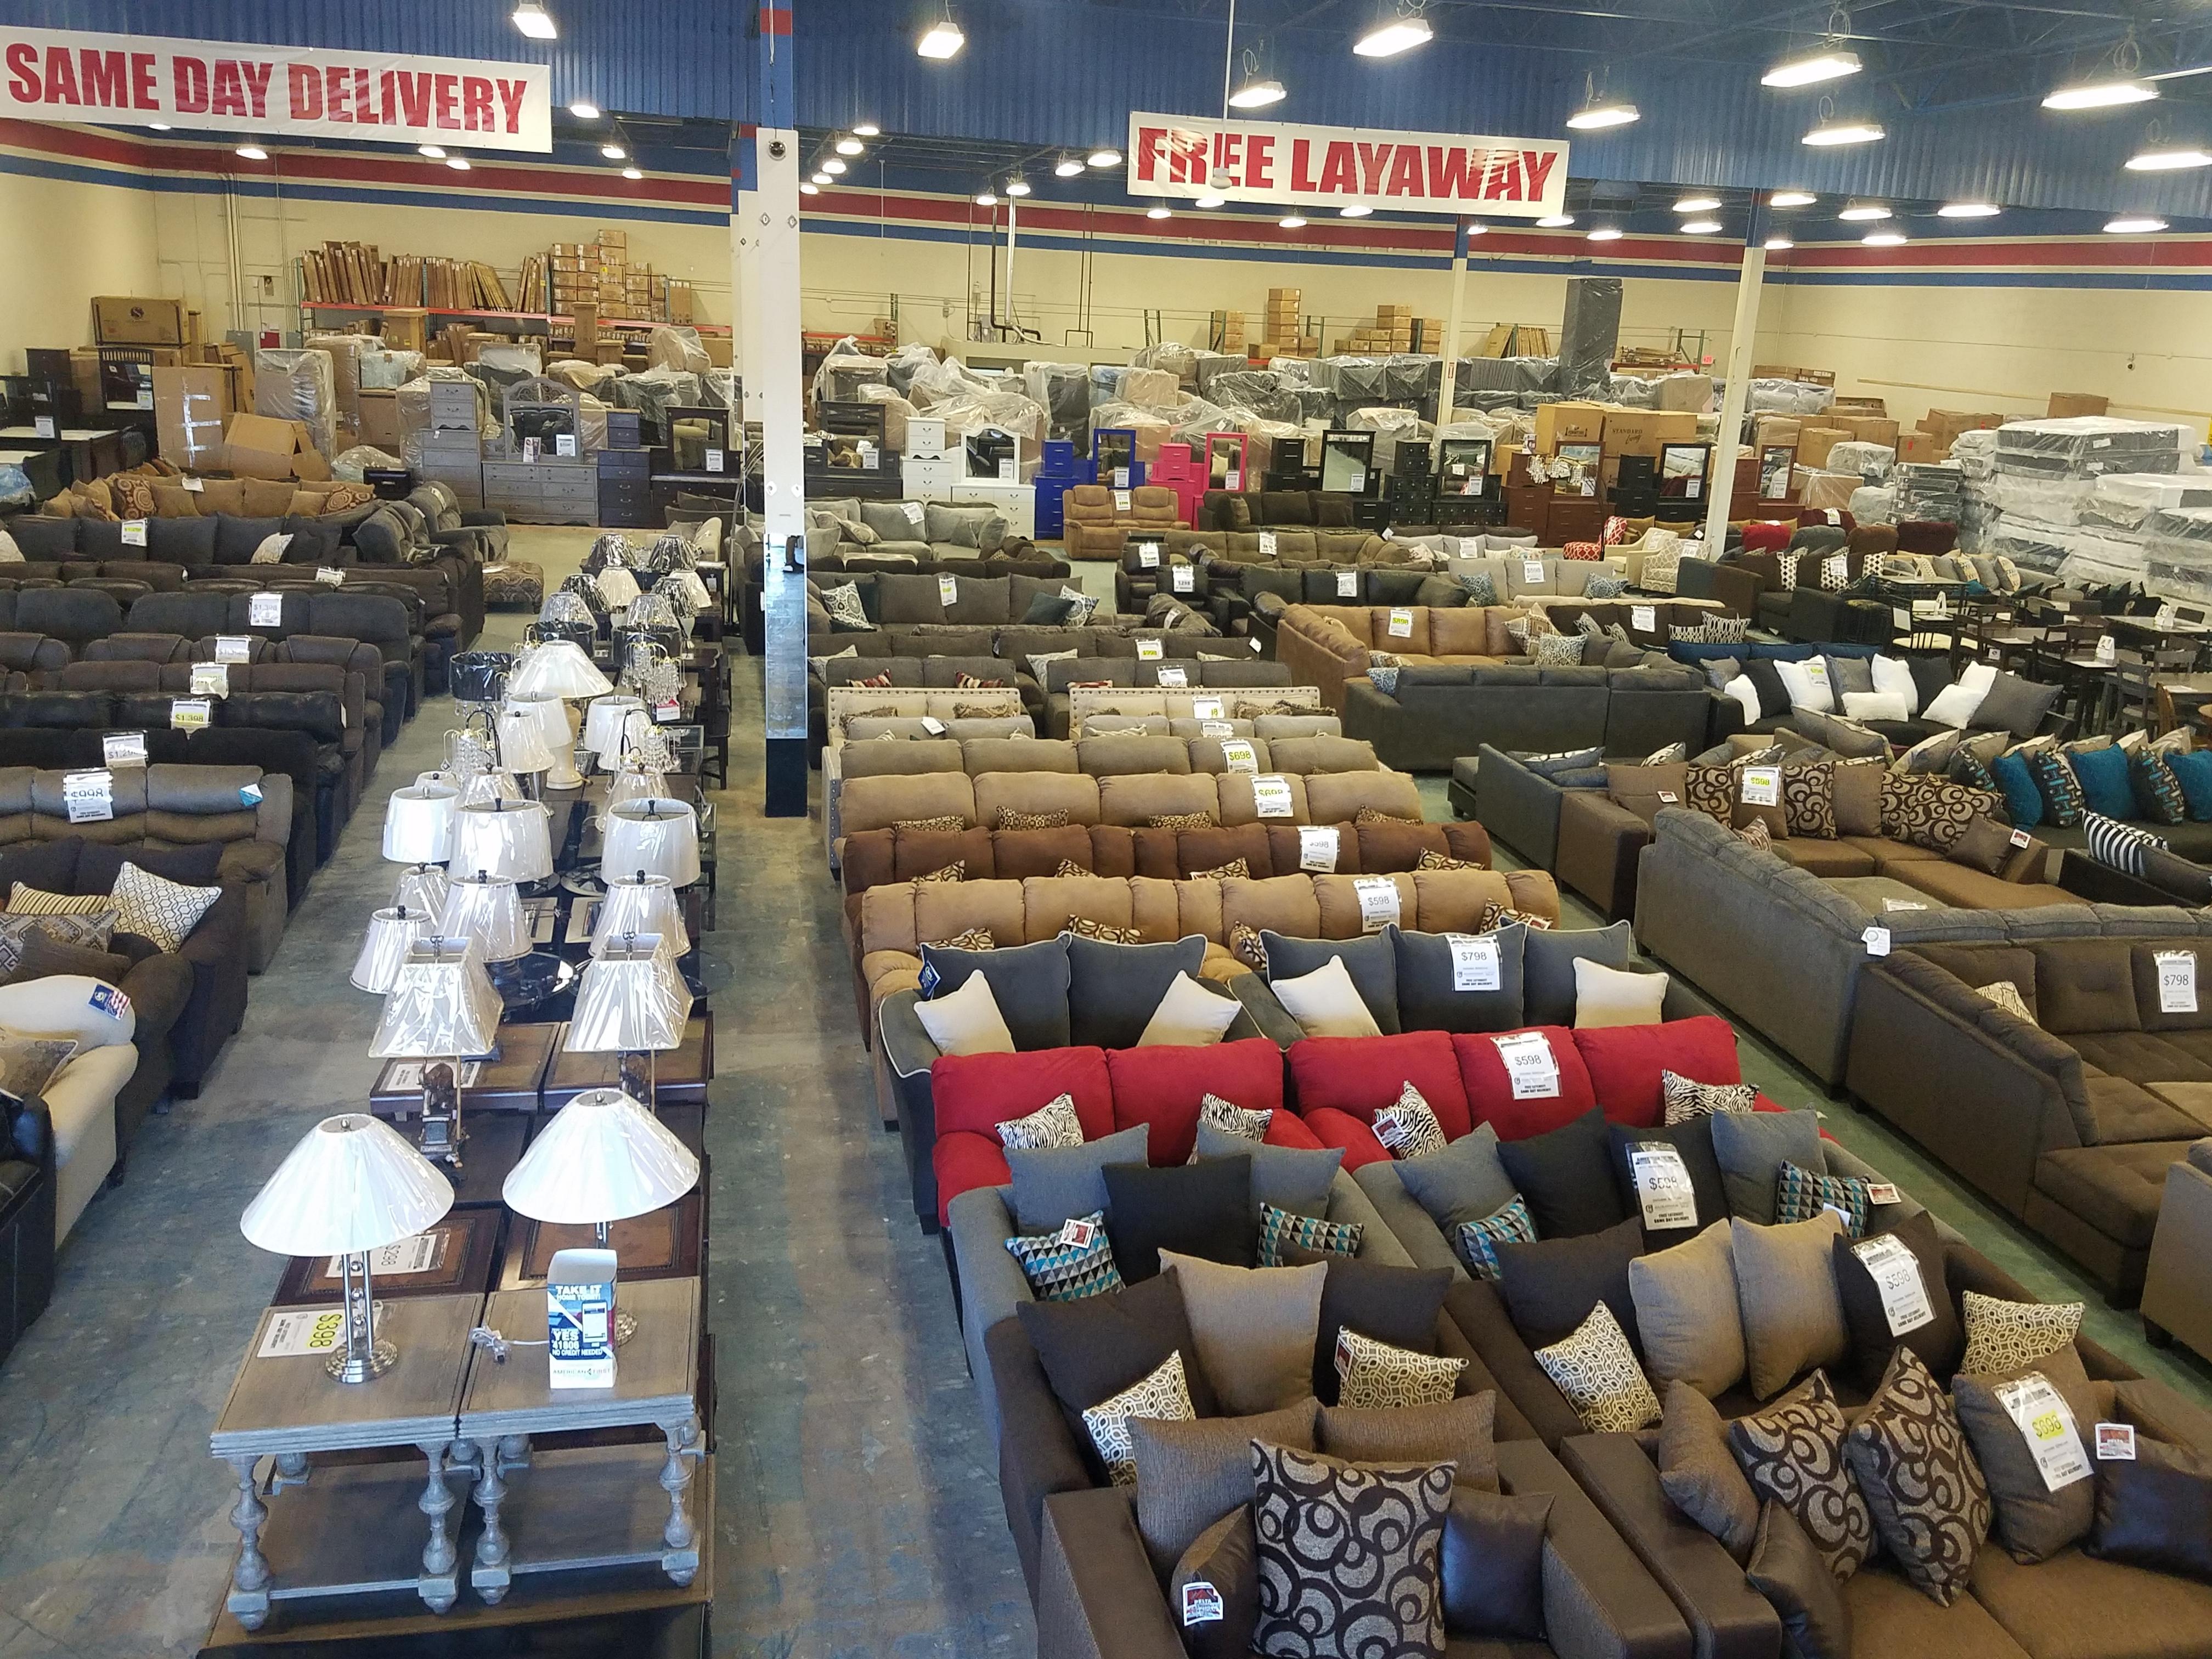 American Freight Furniture and Mattress Photo